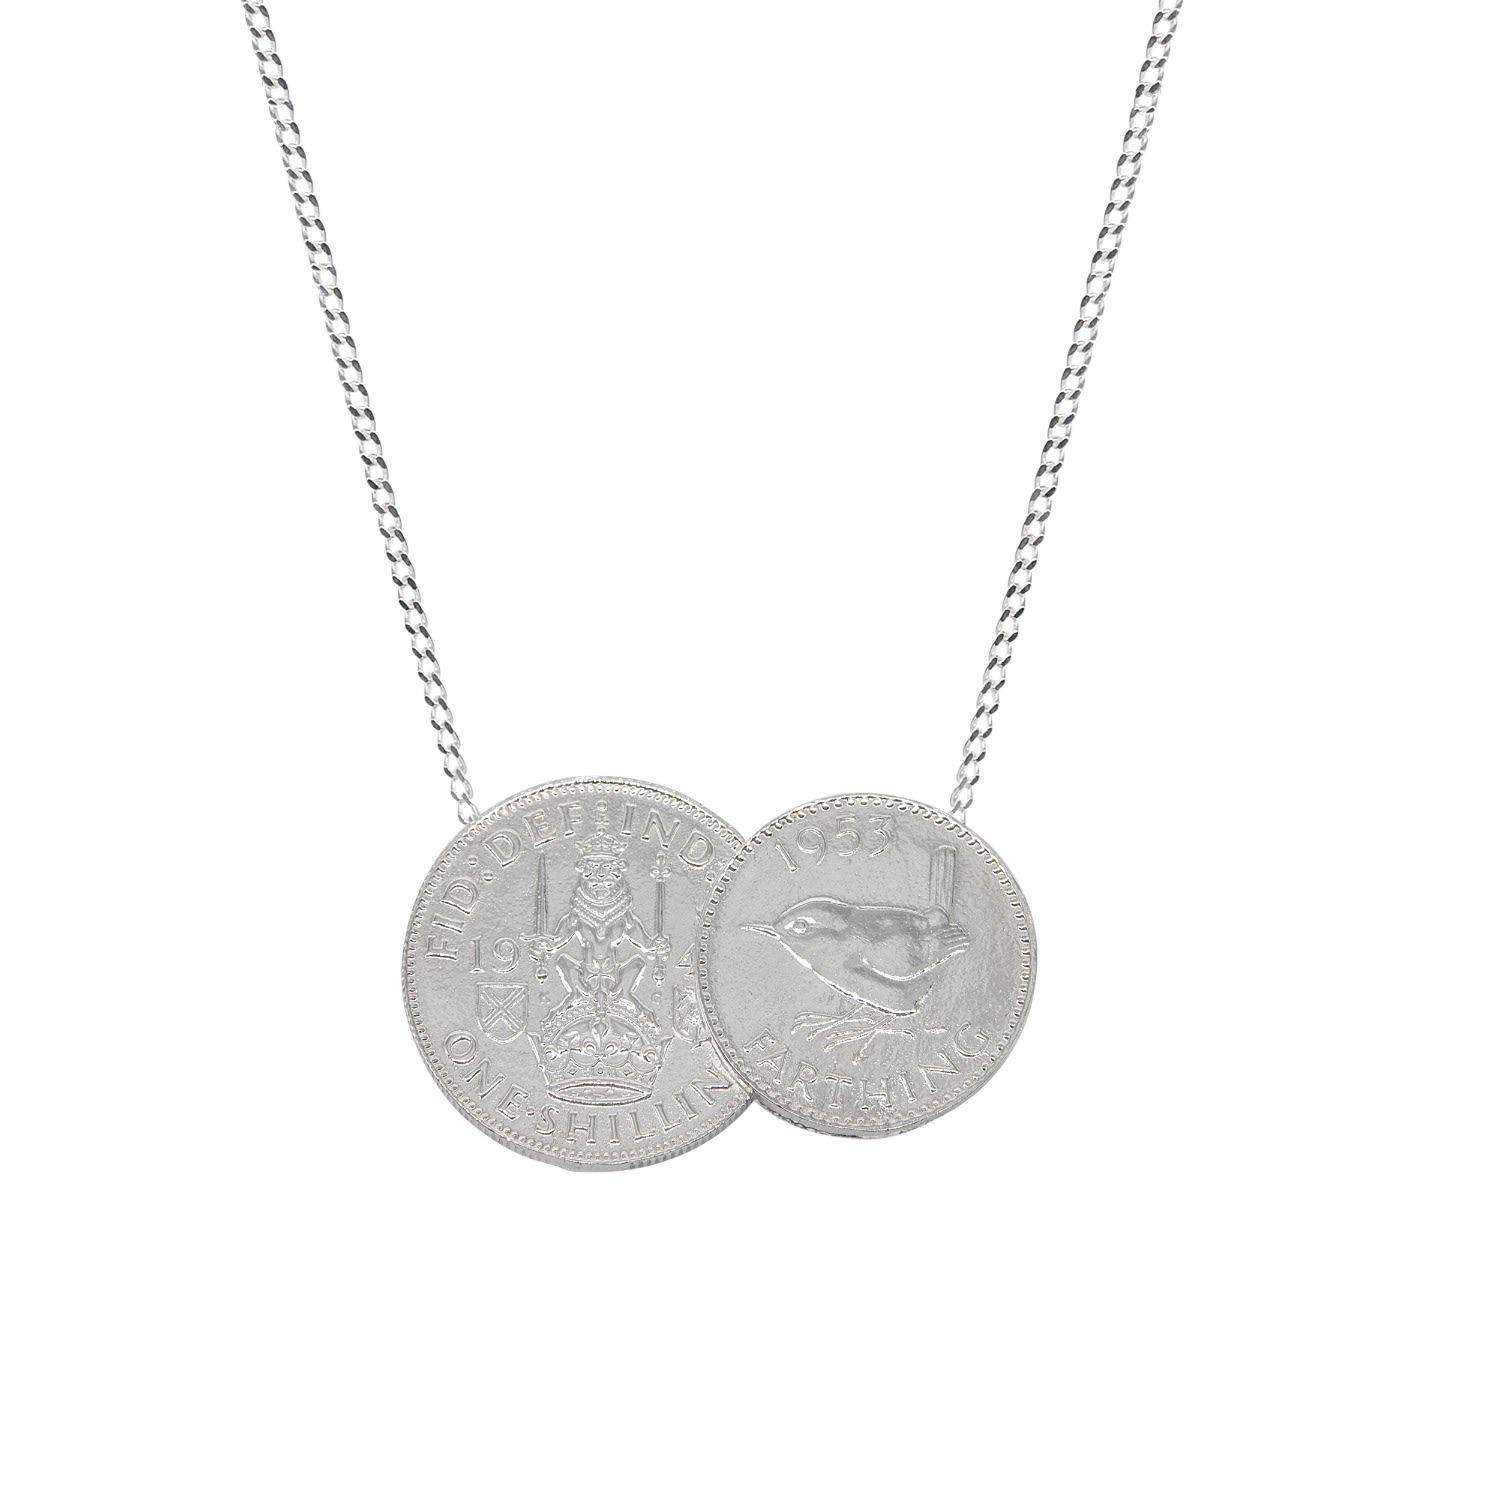 Women’s Scottish & English Double Coin Pendant Silver Necklace Katie Mullally